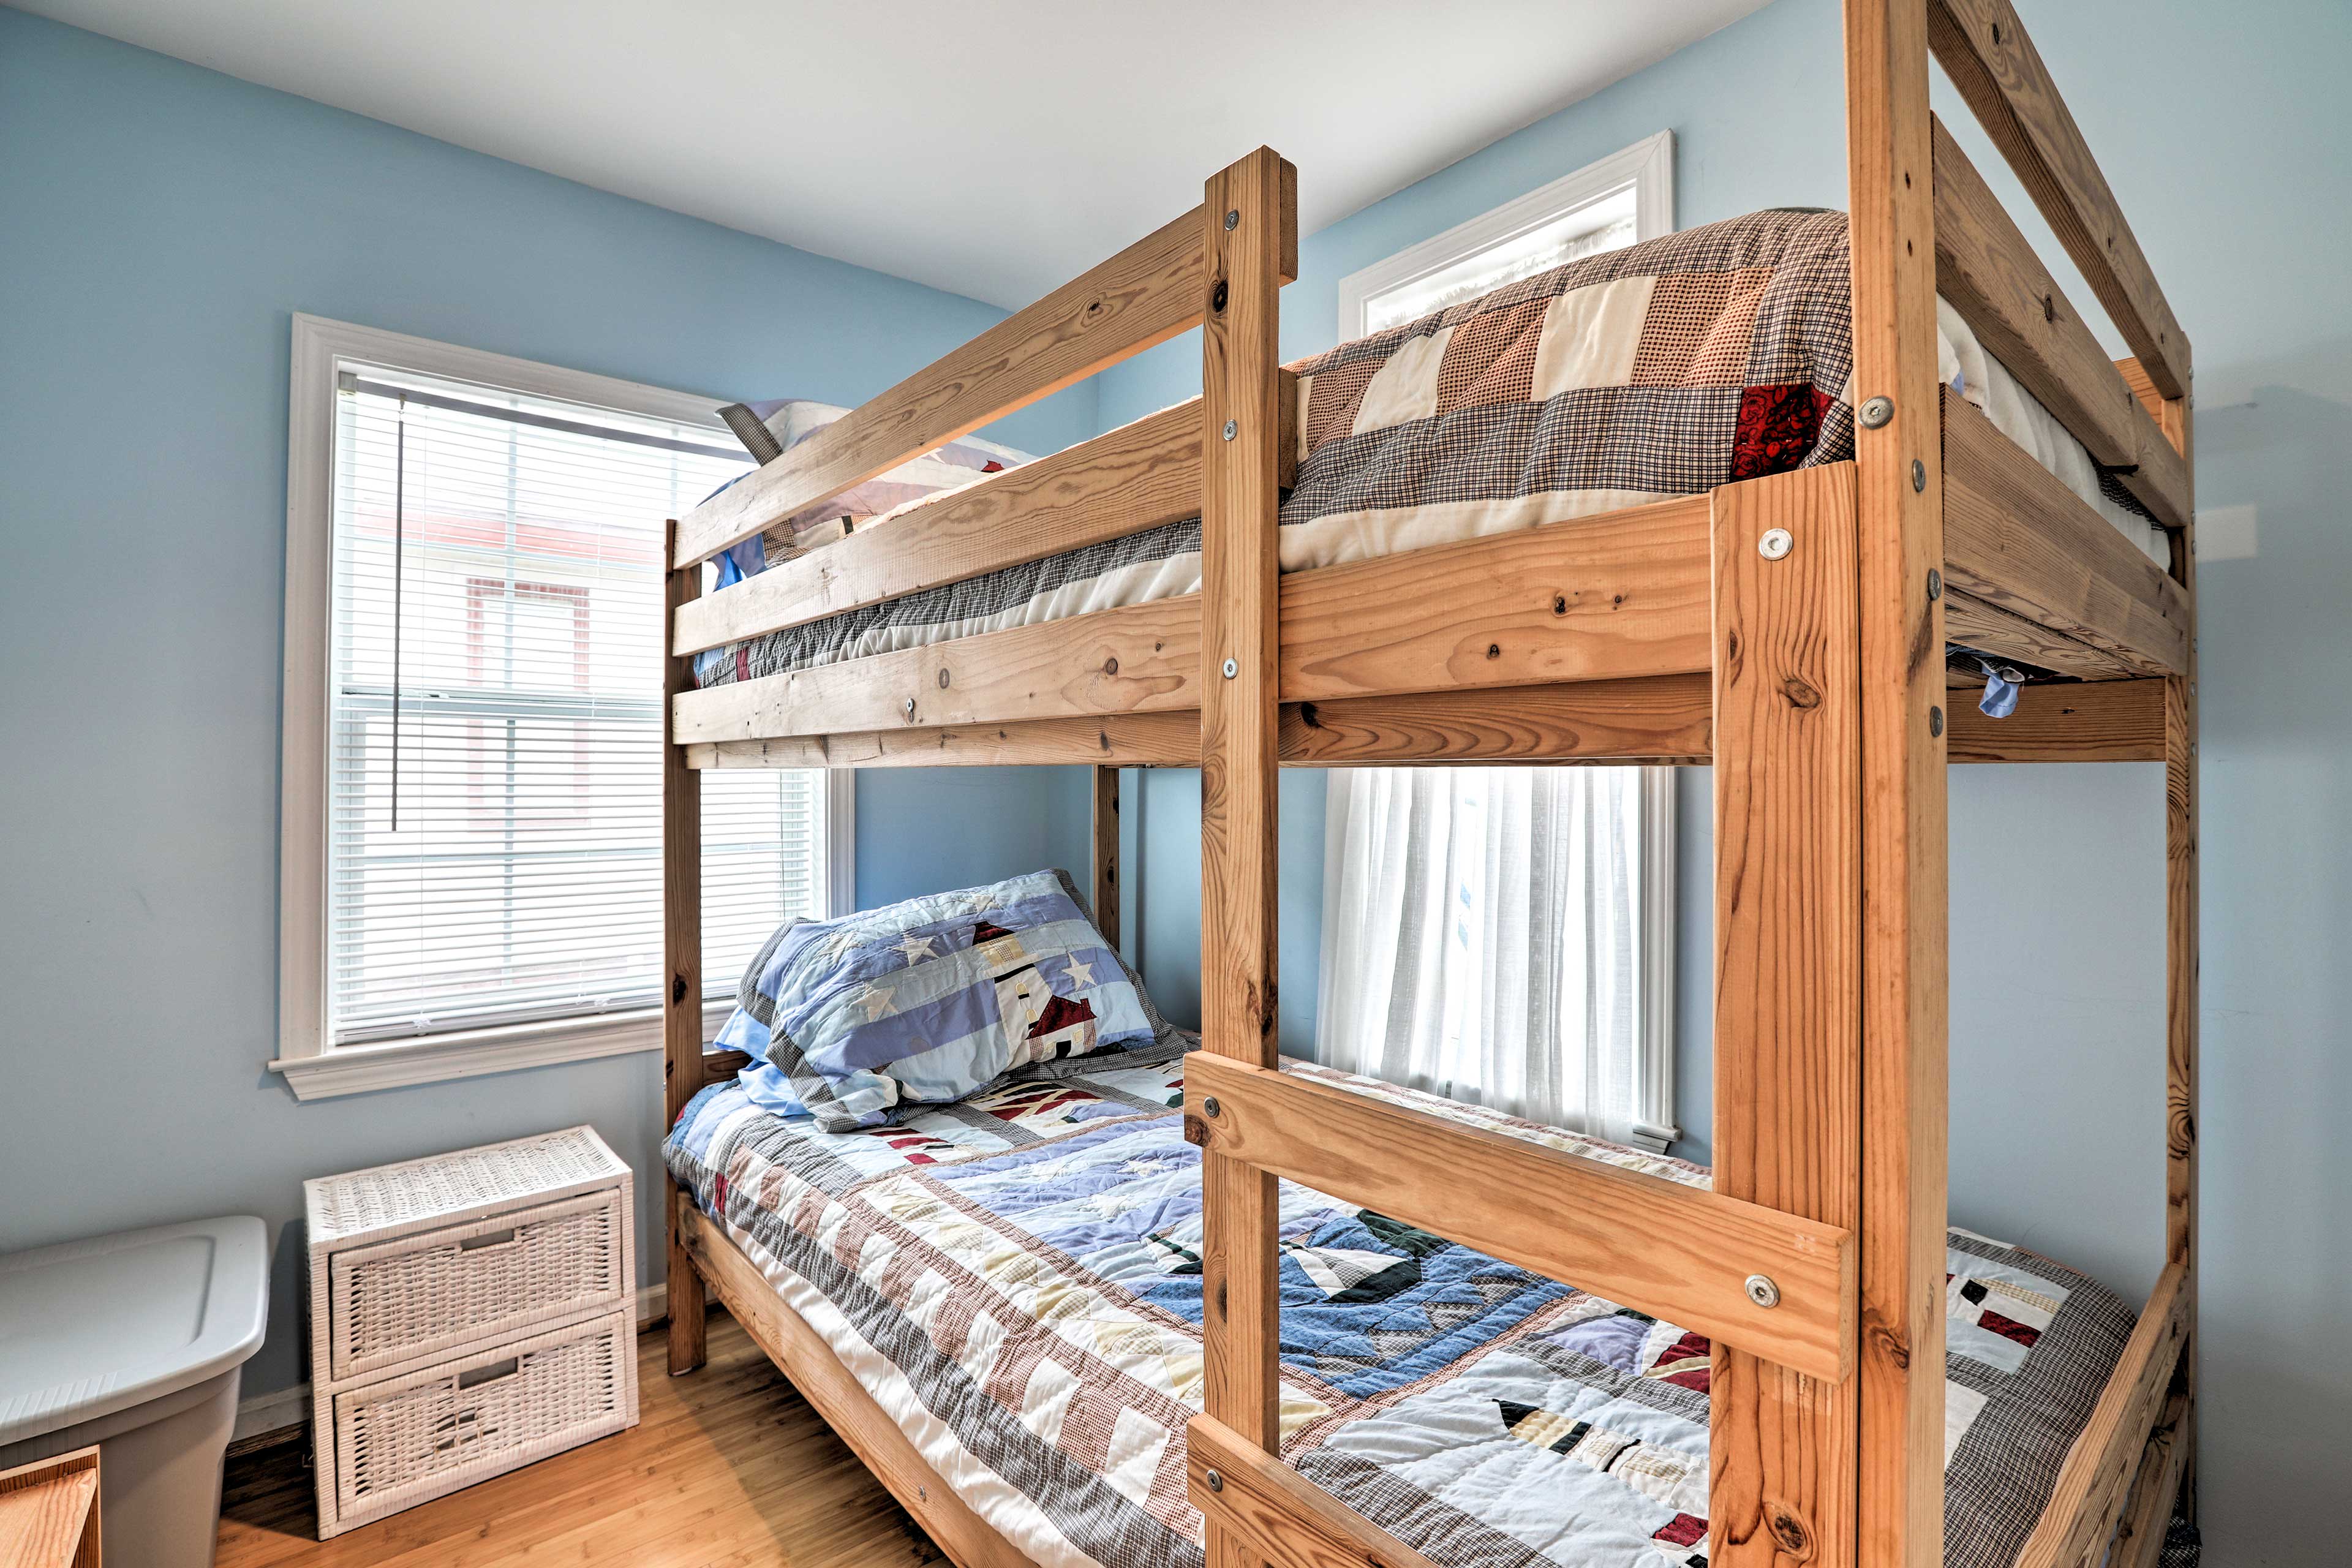 Two guests can sleep in this bedroom complete with a twin bunk bed.